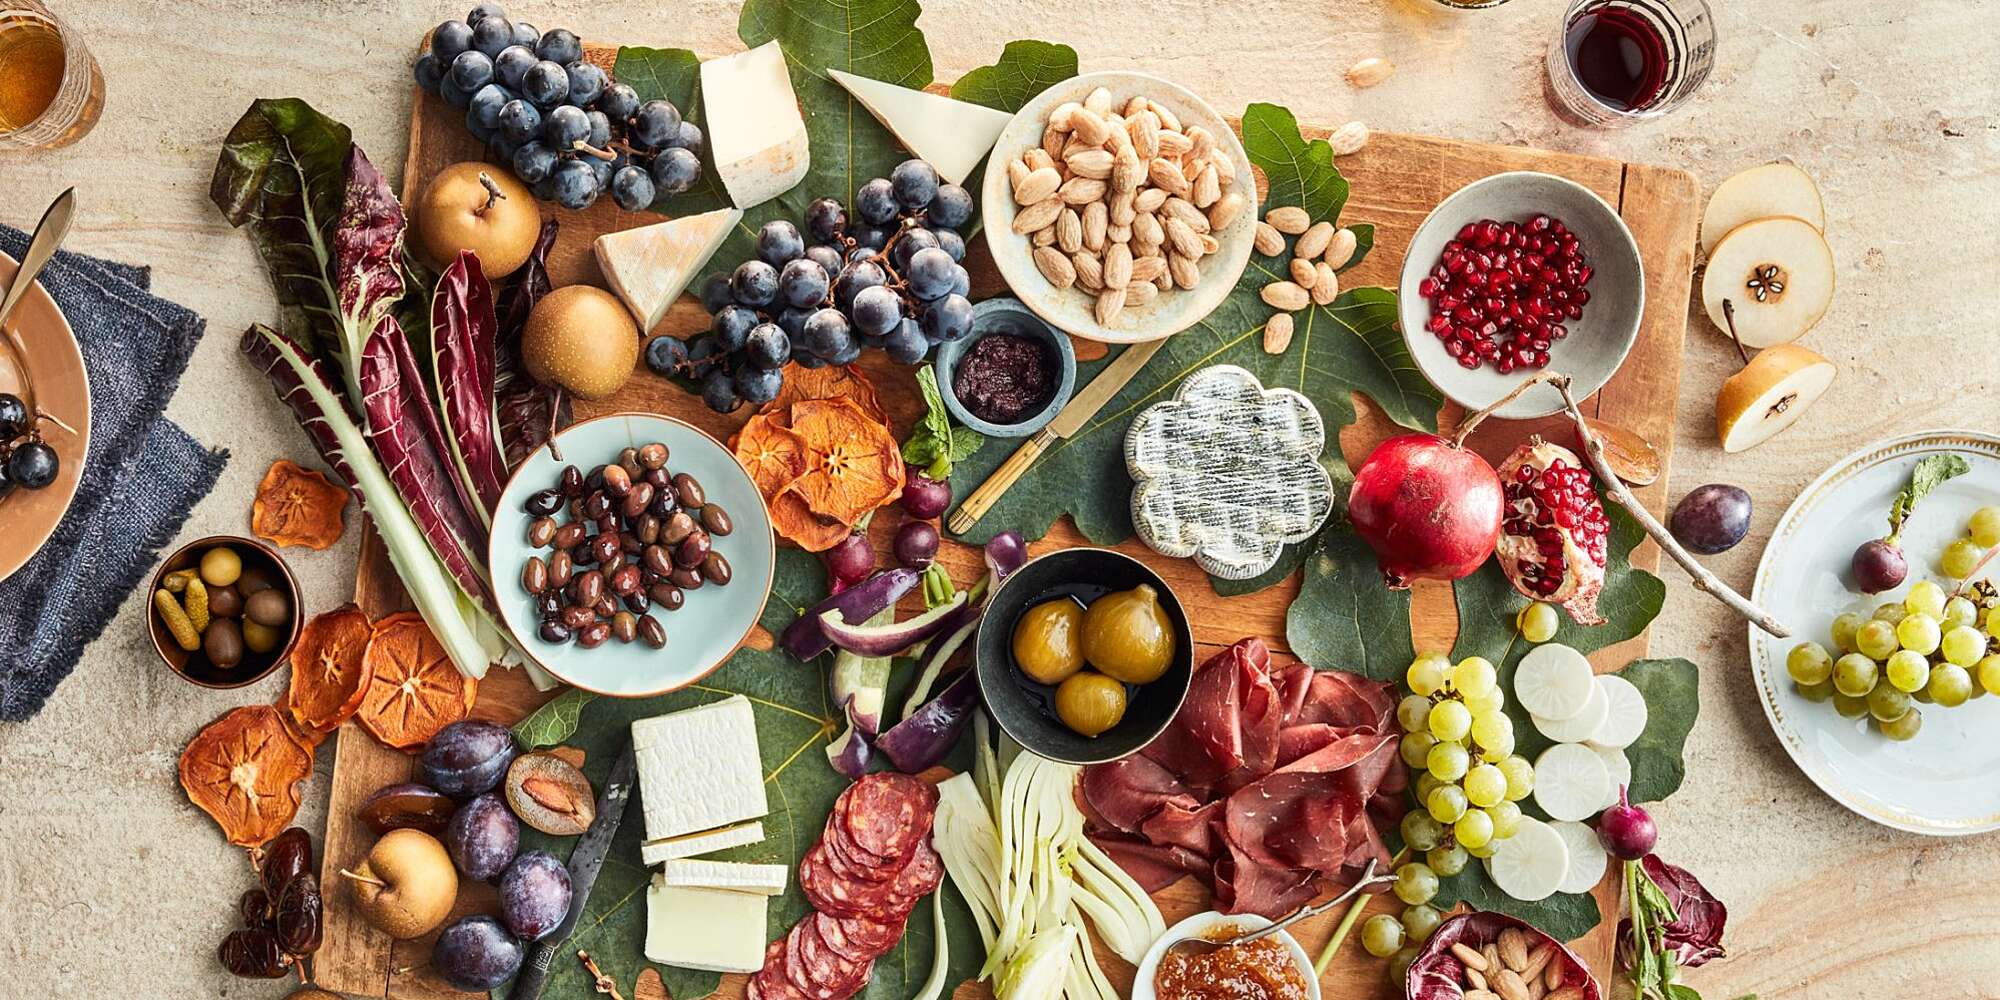 Get the Party Started With a Holiday Grazing Board—It's the Best Way to Feed a Crowd